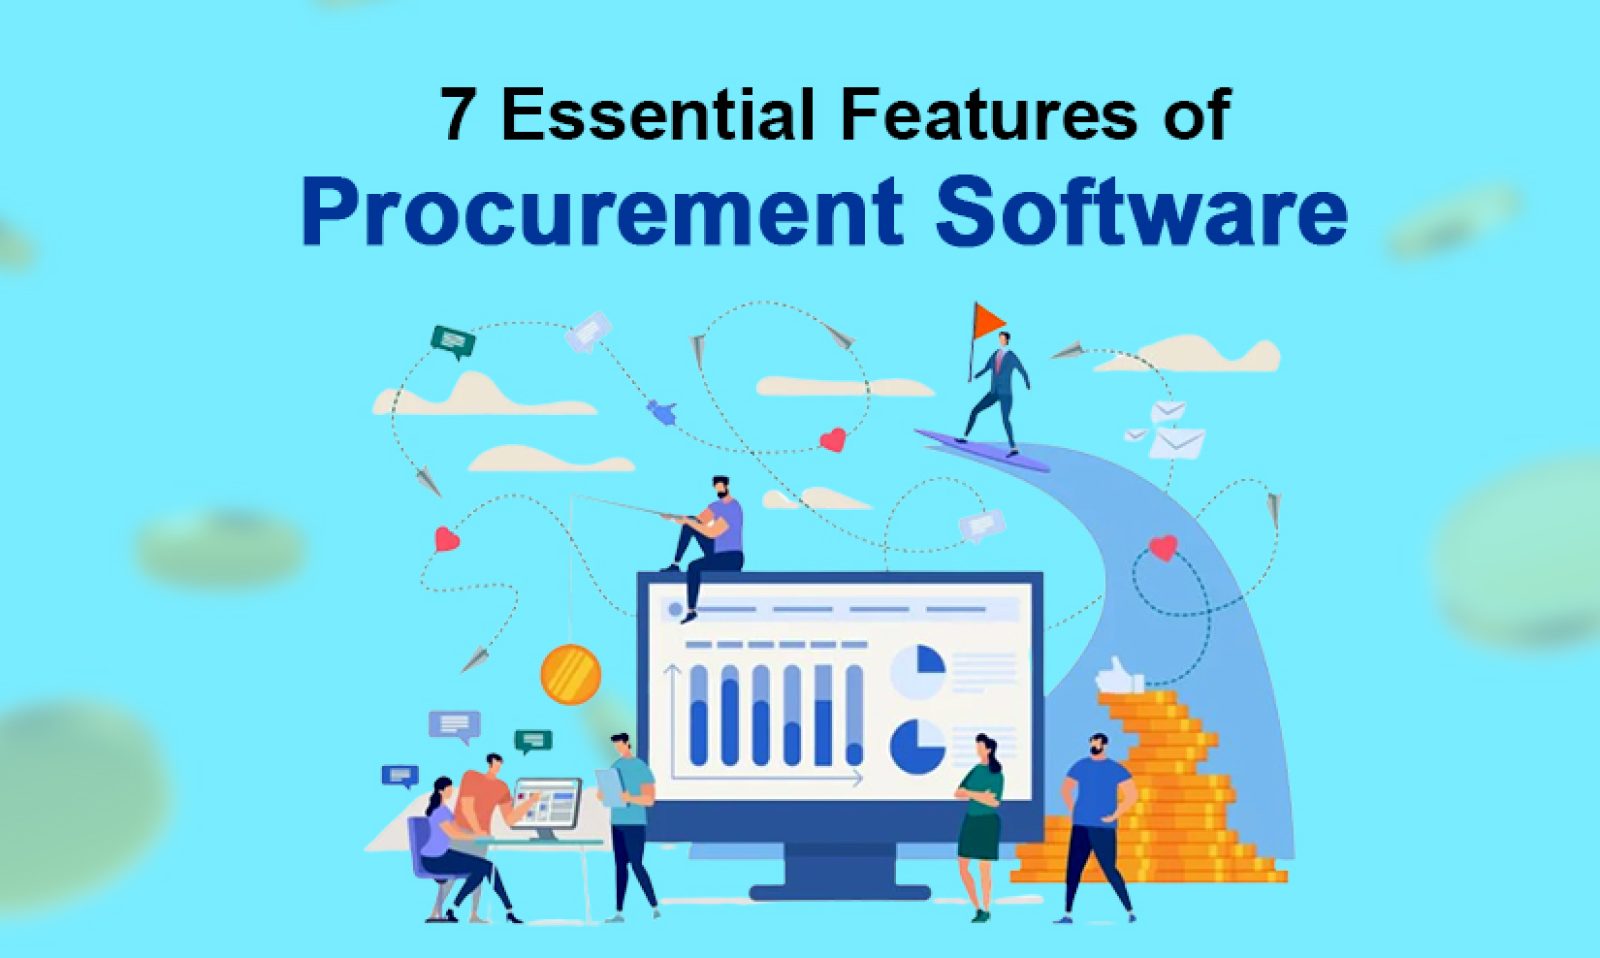 7 Essential Features of Procurement Software